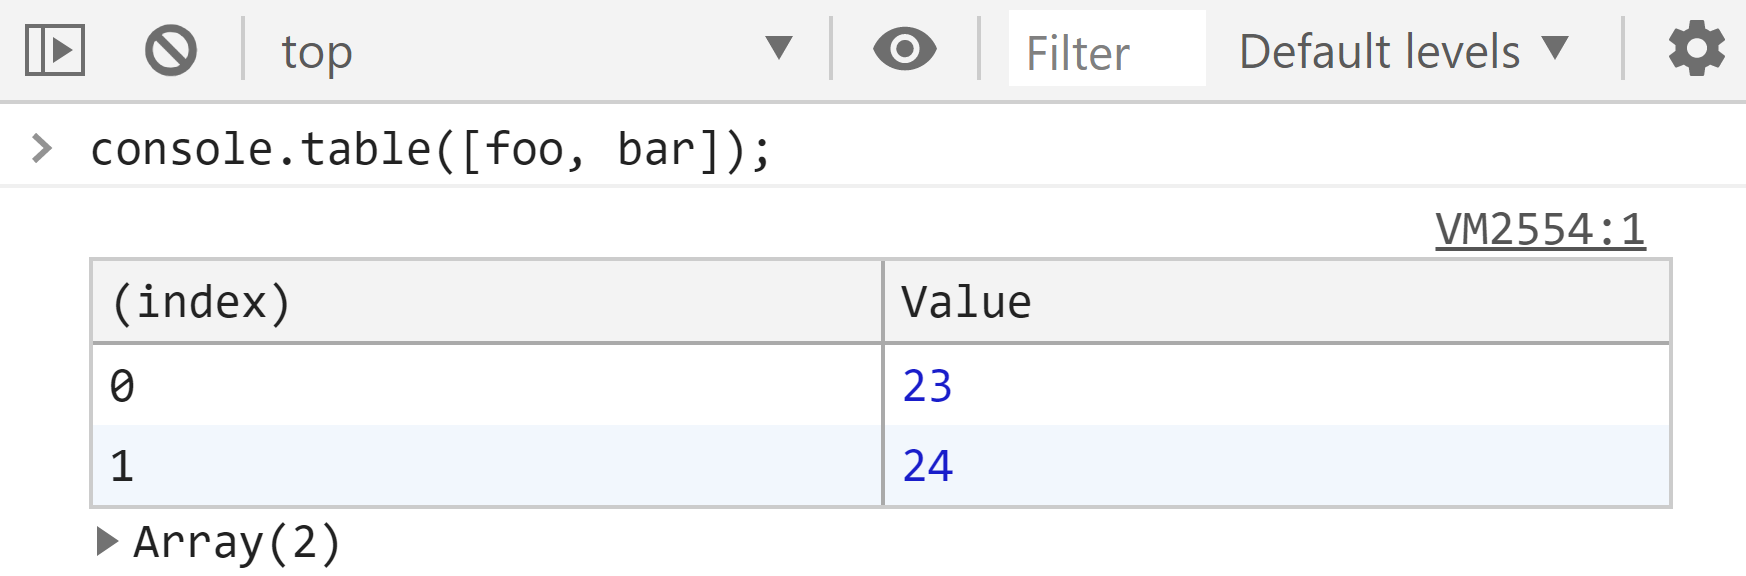 Output of console.table()